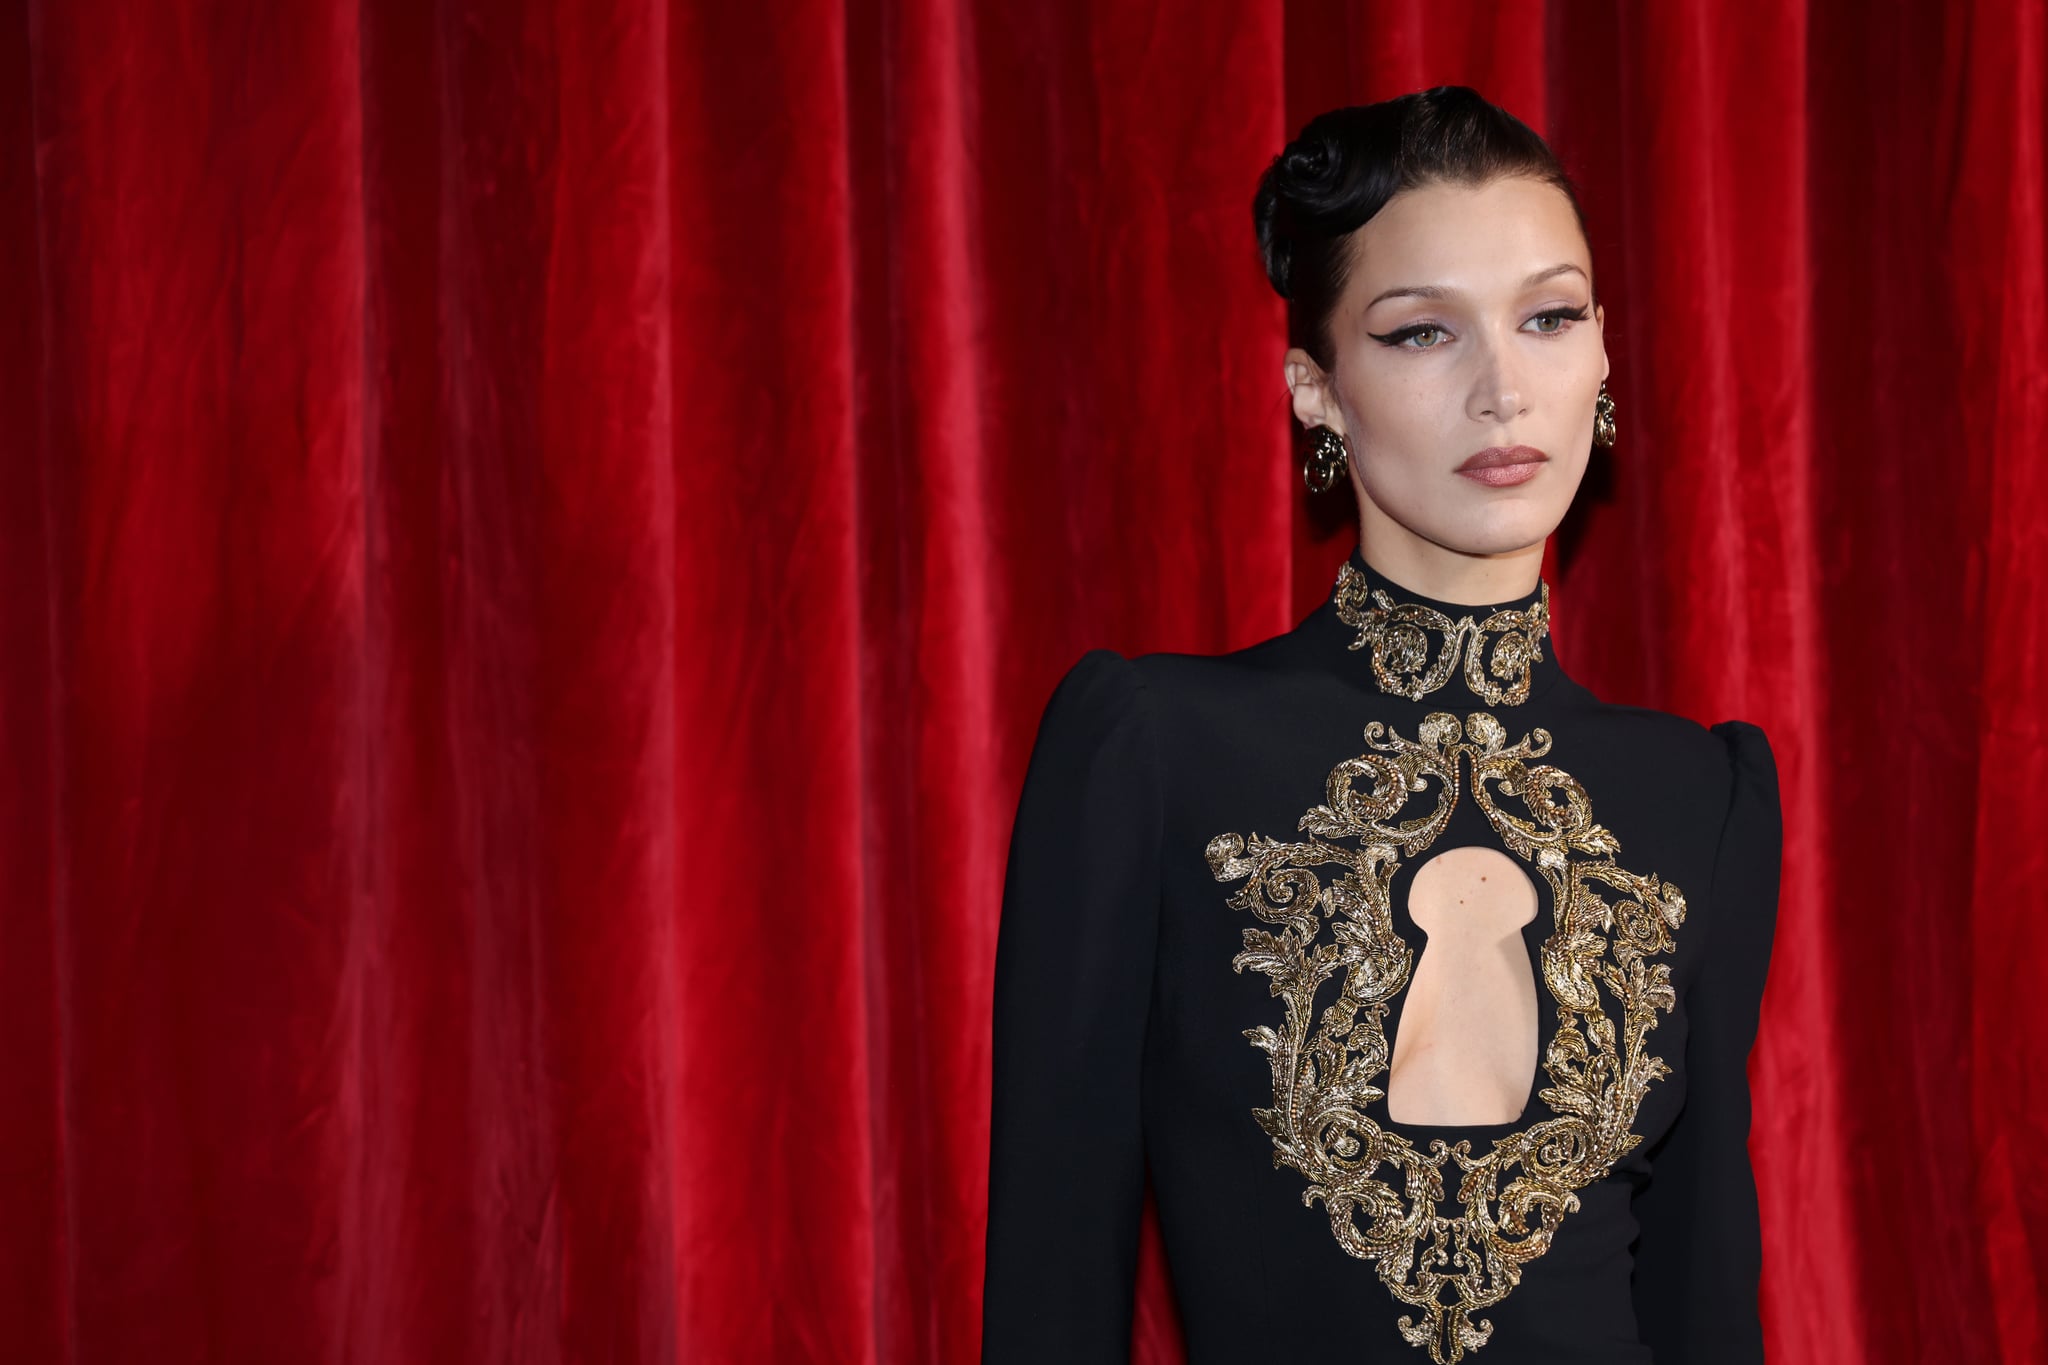 MILAN, ITALY - FEBRUARY 24: Bella Hadid poses backstage of the Moschino fashion show during the Milan Fashion Week Fall/Winter 2022/2023 on February 24, 2022 in Milan, Italy. (Photo by Vittorio Zunino Celotto/Getty Images)